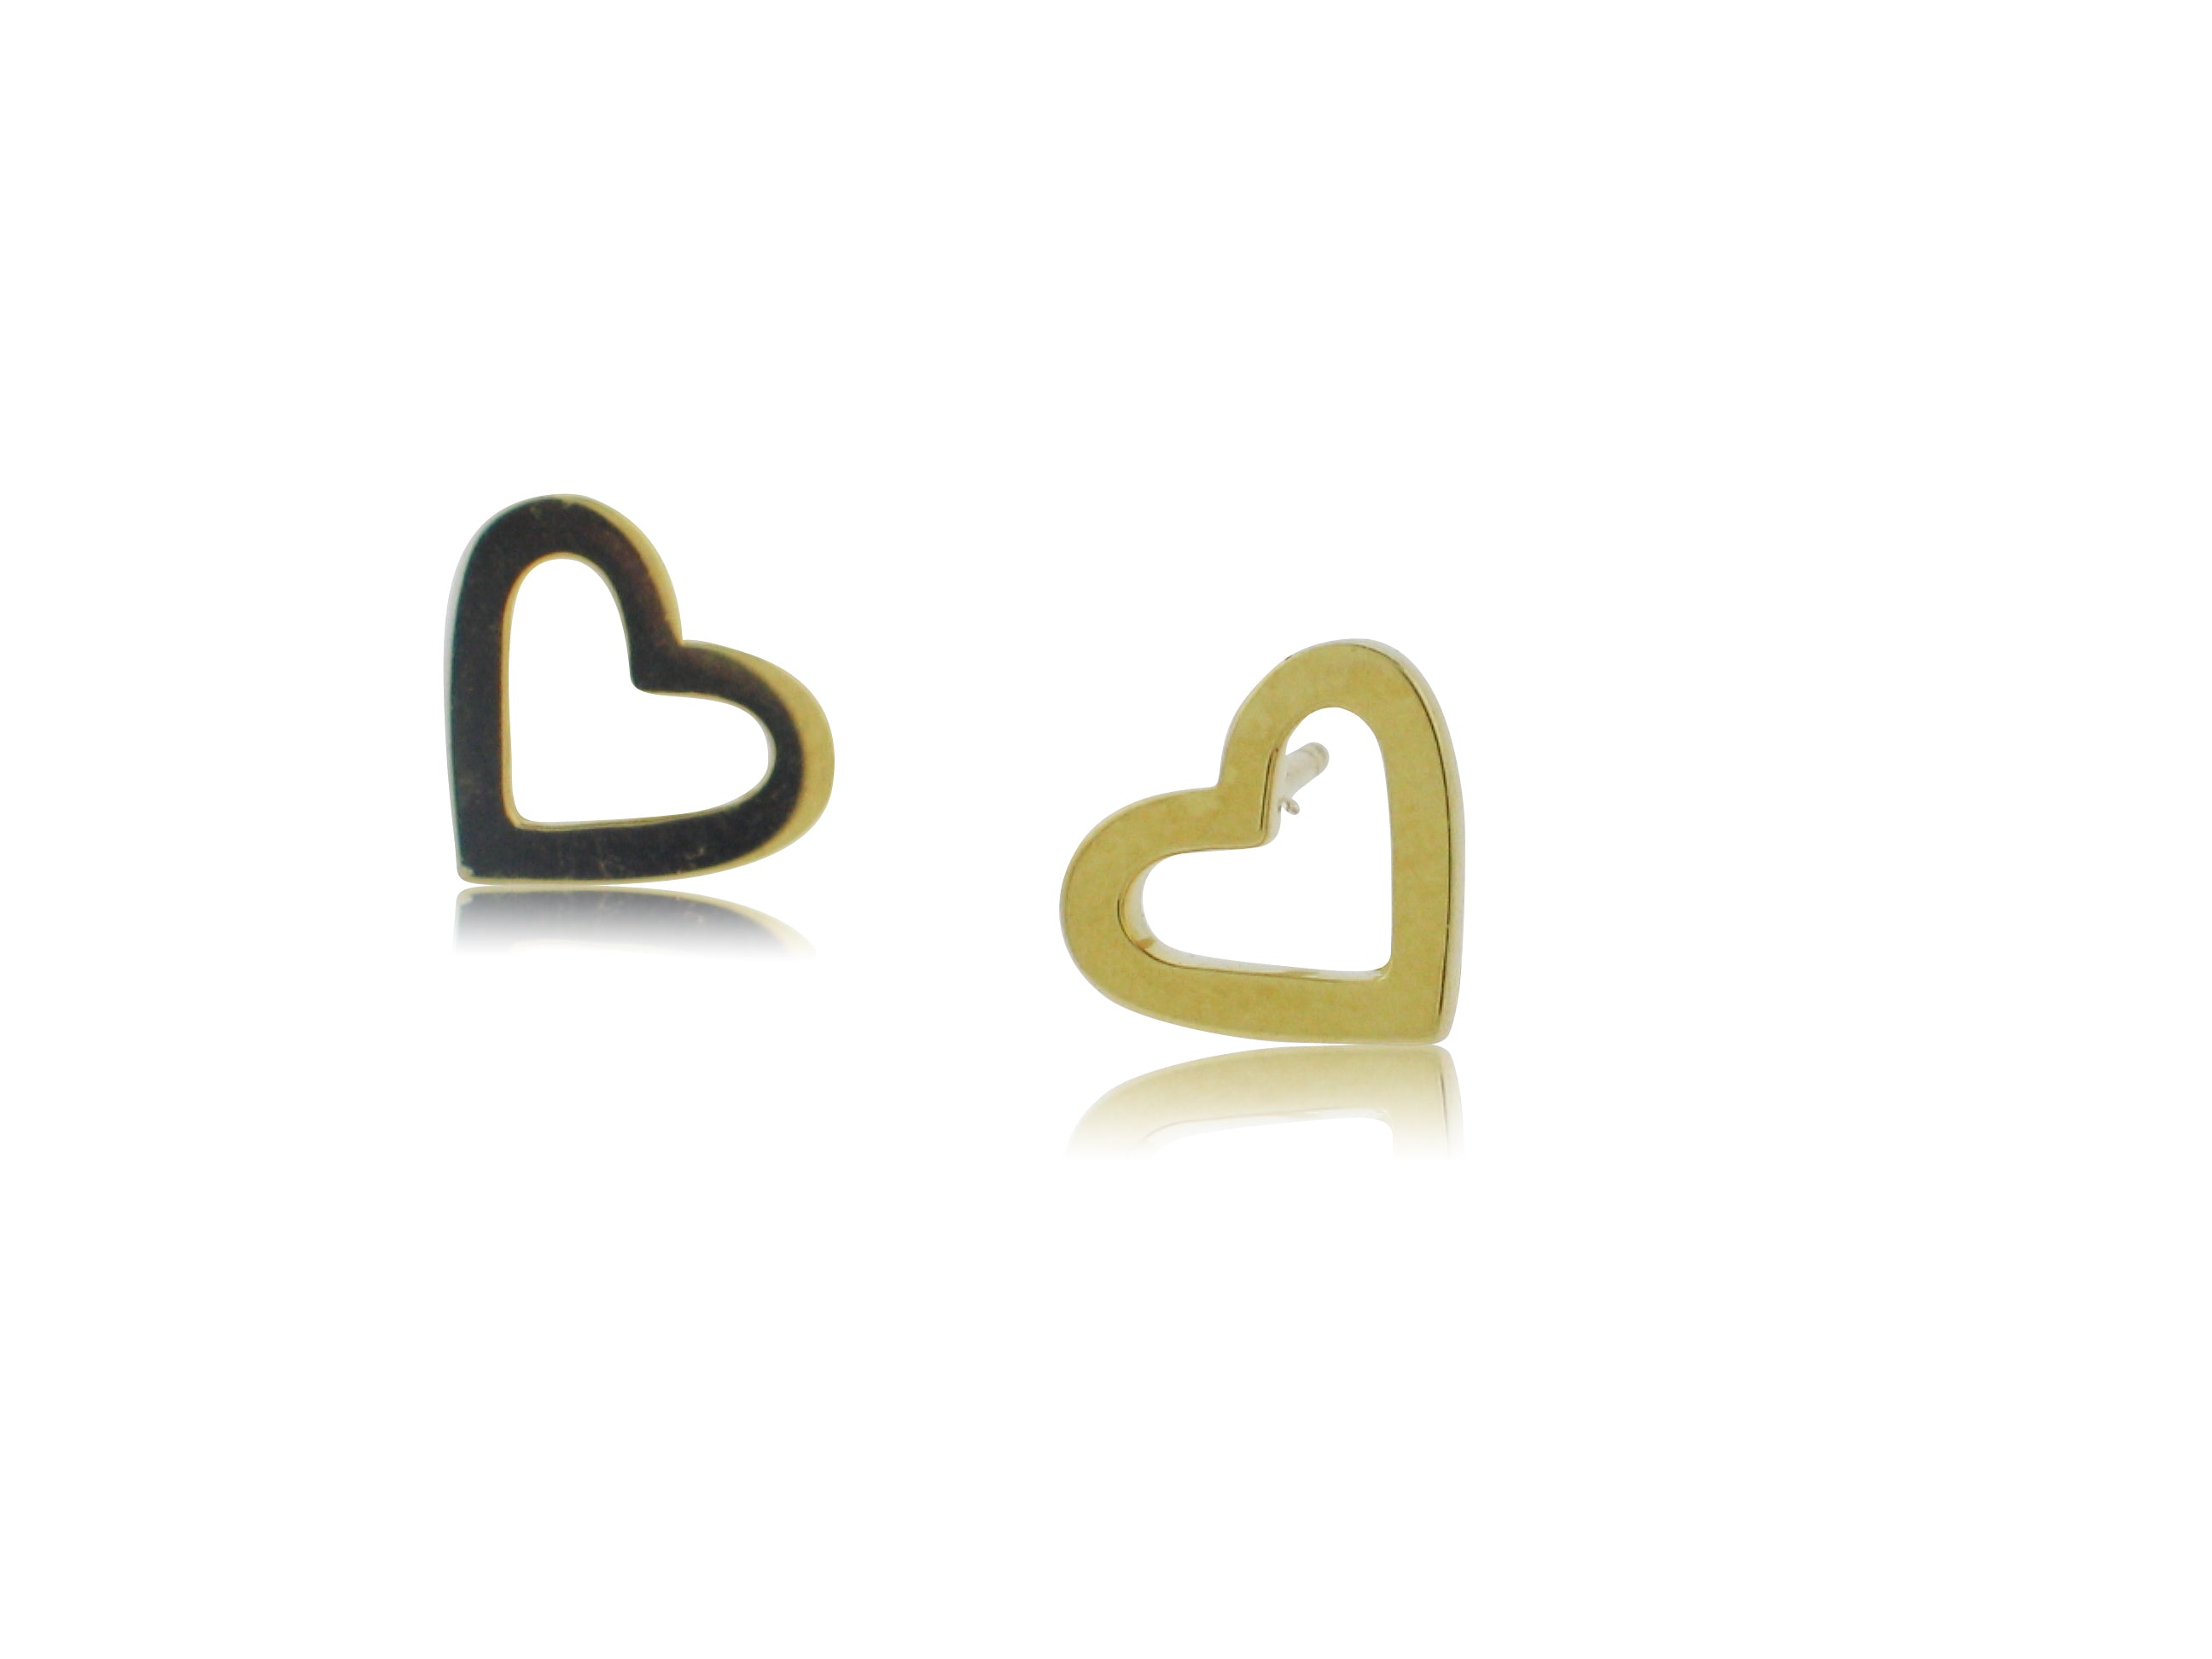 ROBERTO COIN 18K YELLOW GOLD HEART STUD EARRINGS FROM THE GOLD COLLECTION